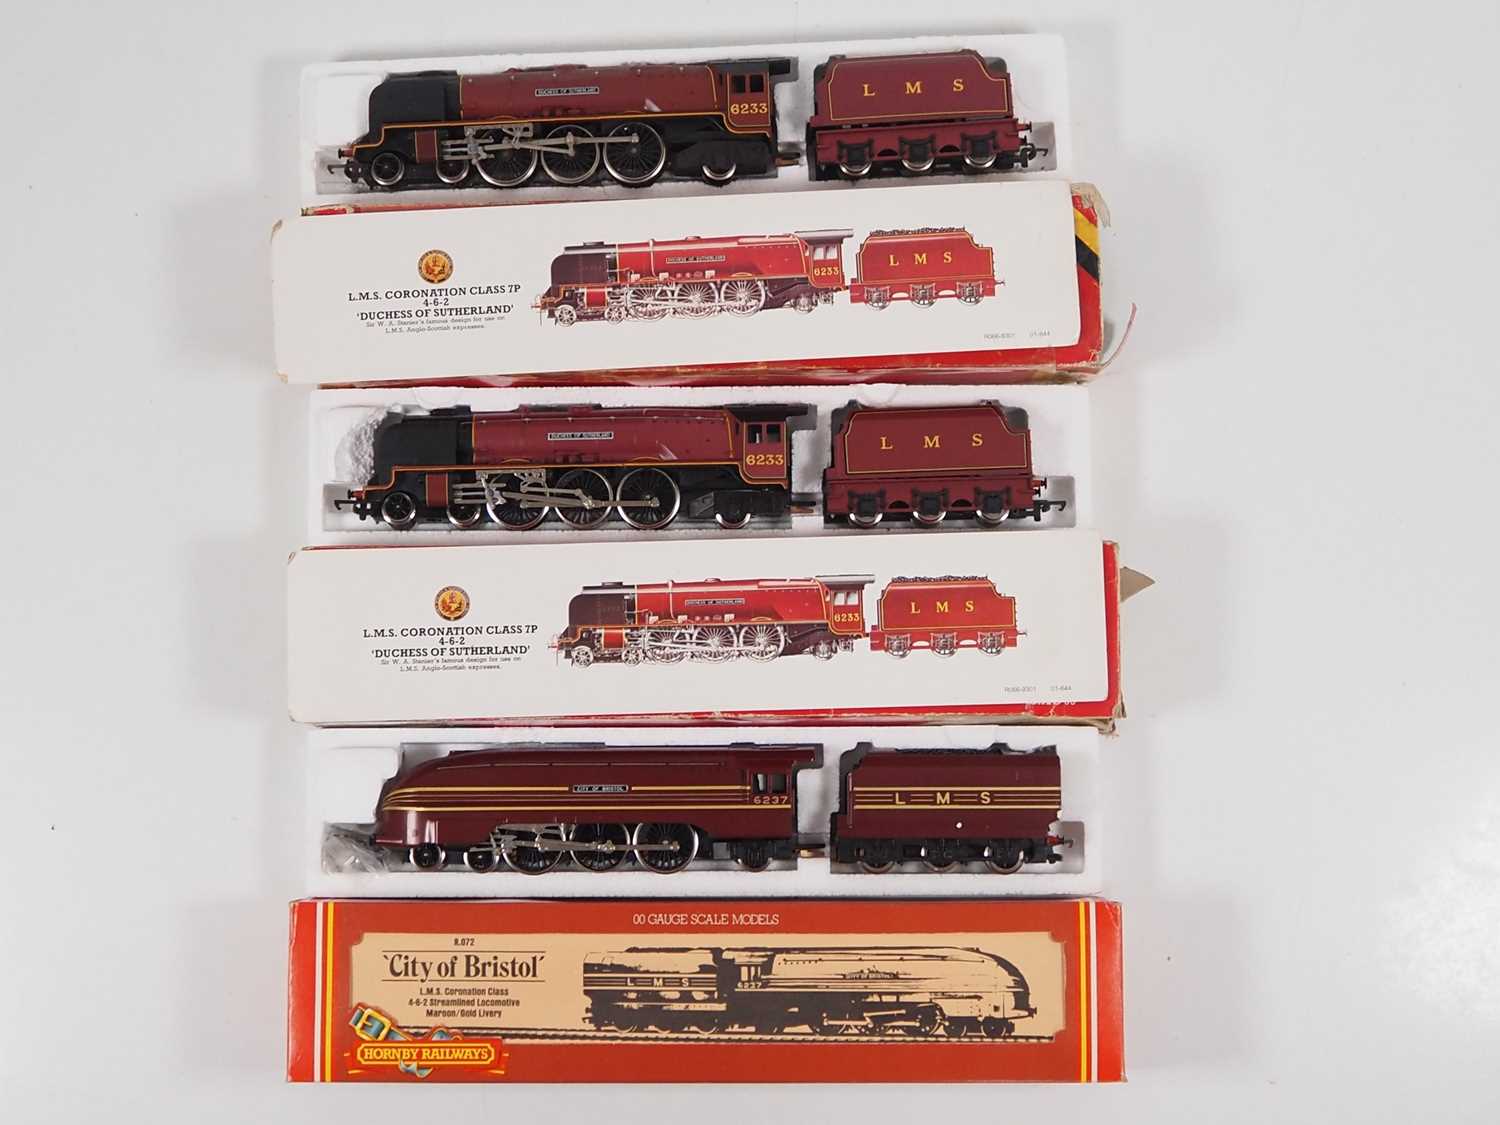 A group of OO gauge steam locomotives by HORNBY all in LMS maroon livery, Duchess of Sutherland